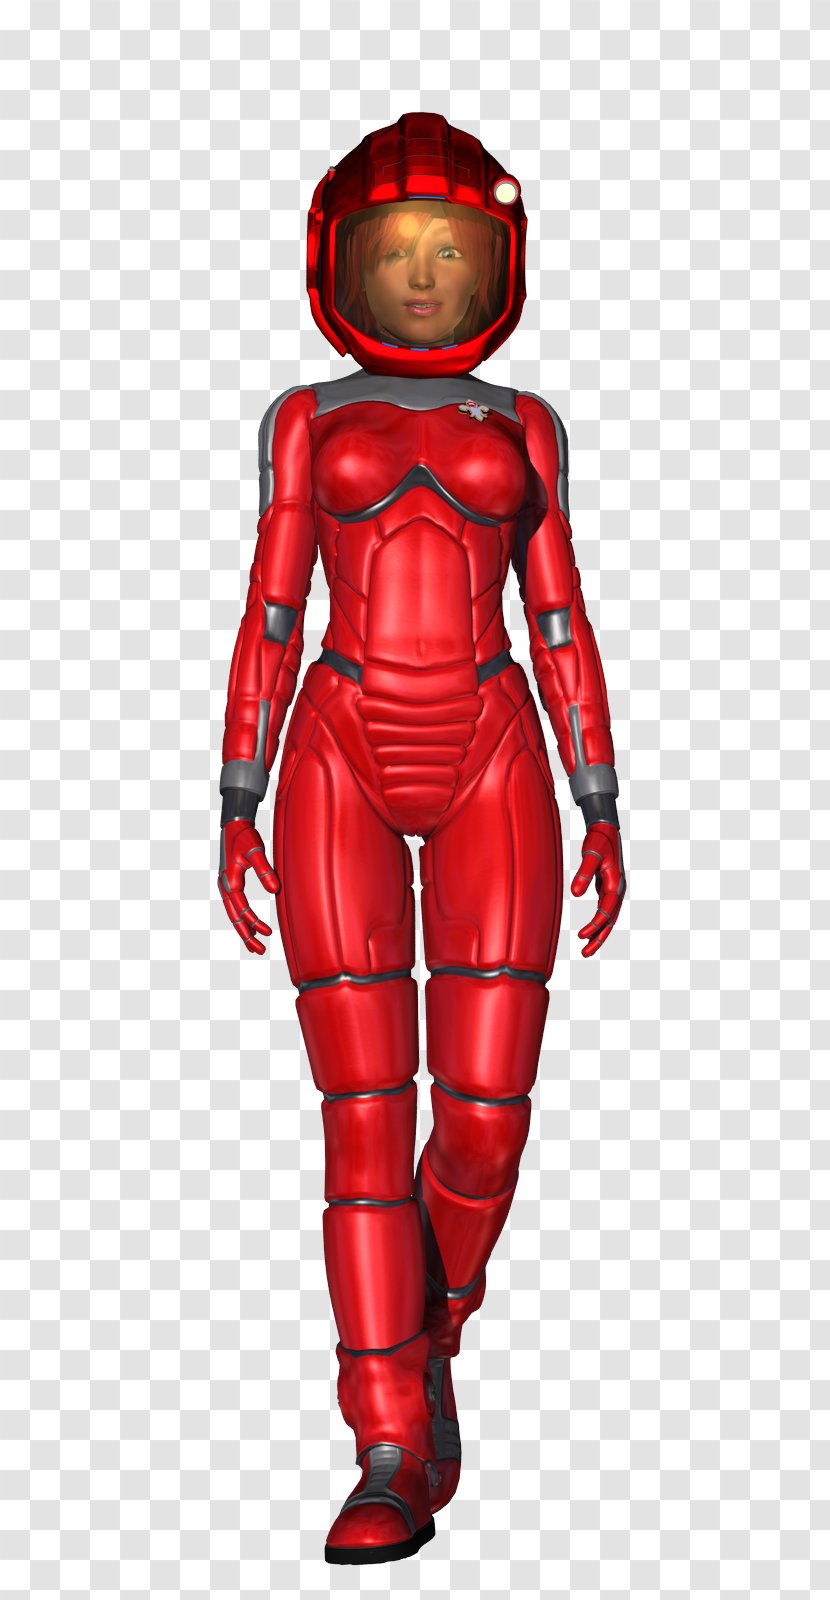 Space Suit Outer Clothing Art - Fictional Character Transparent PNG